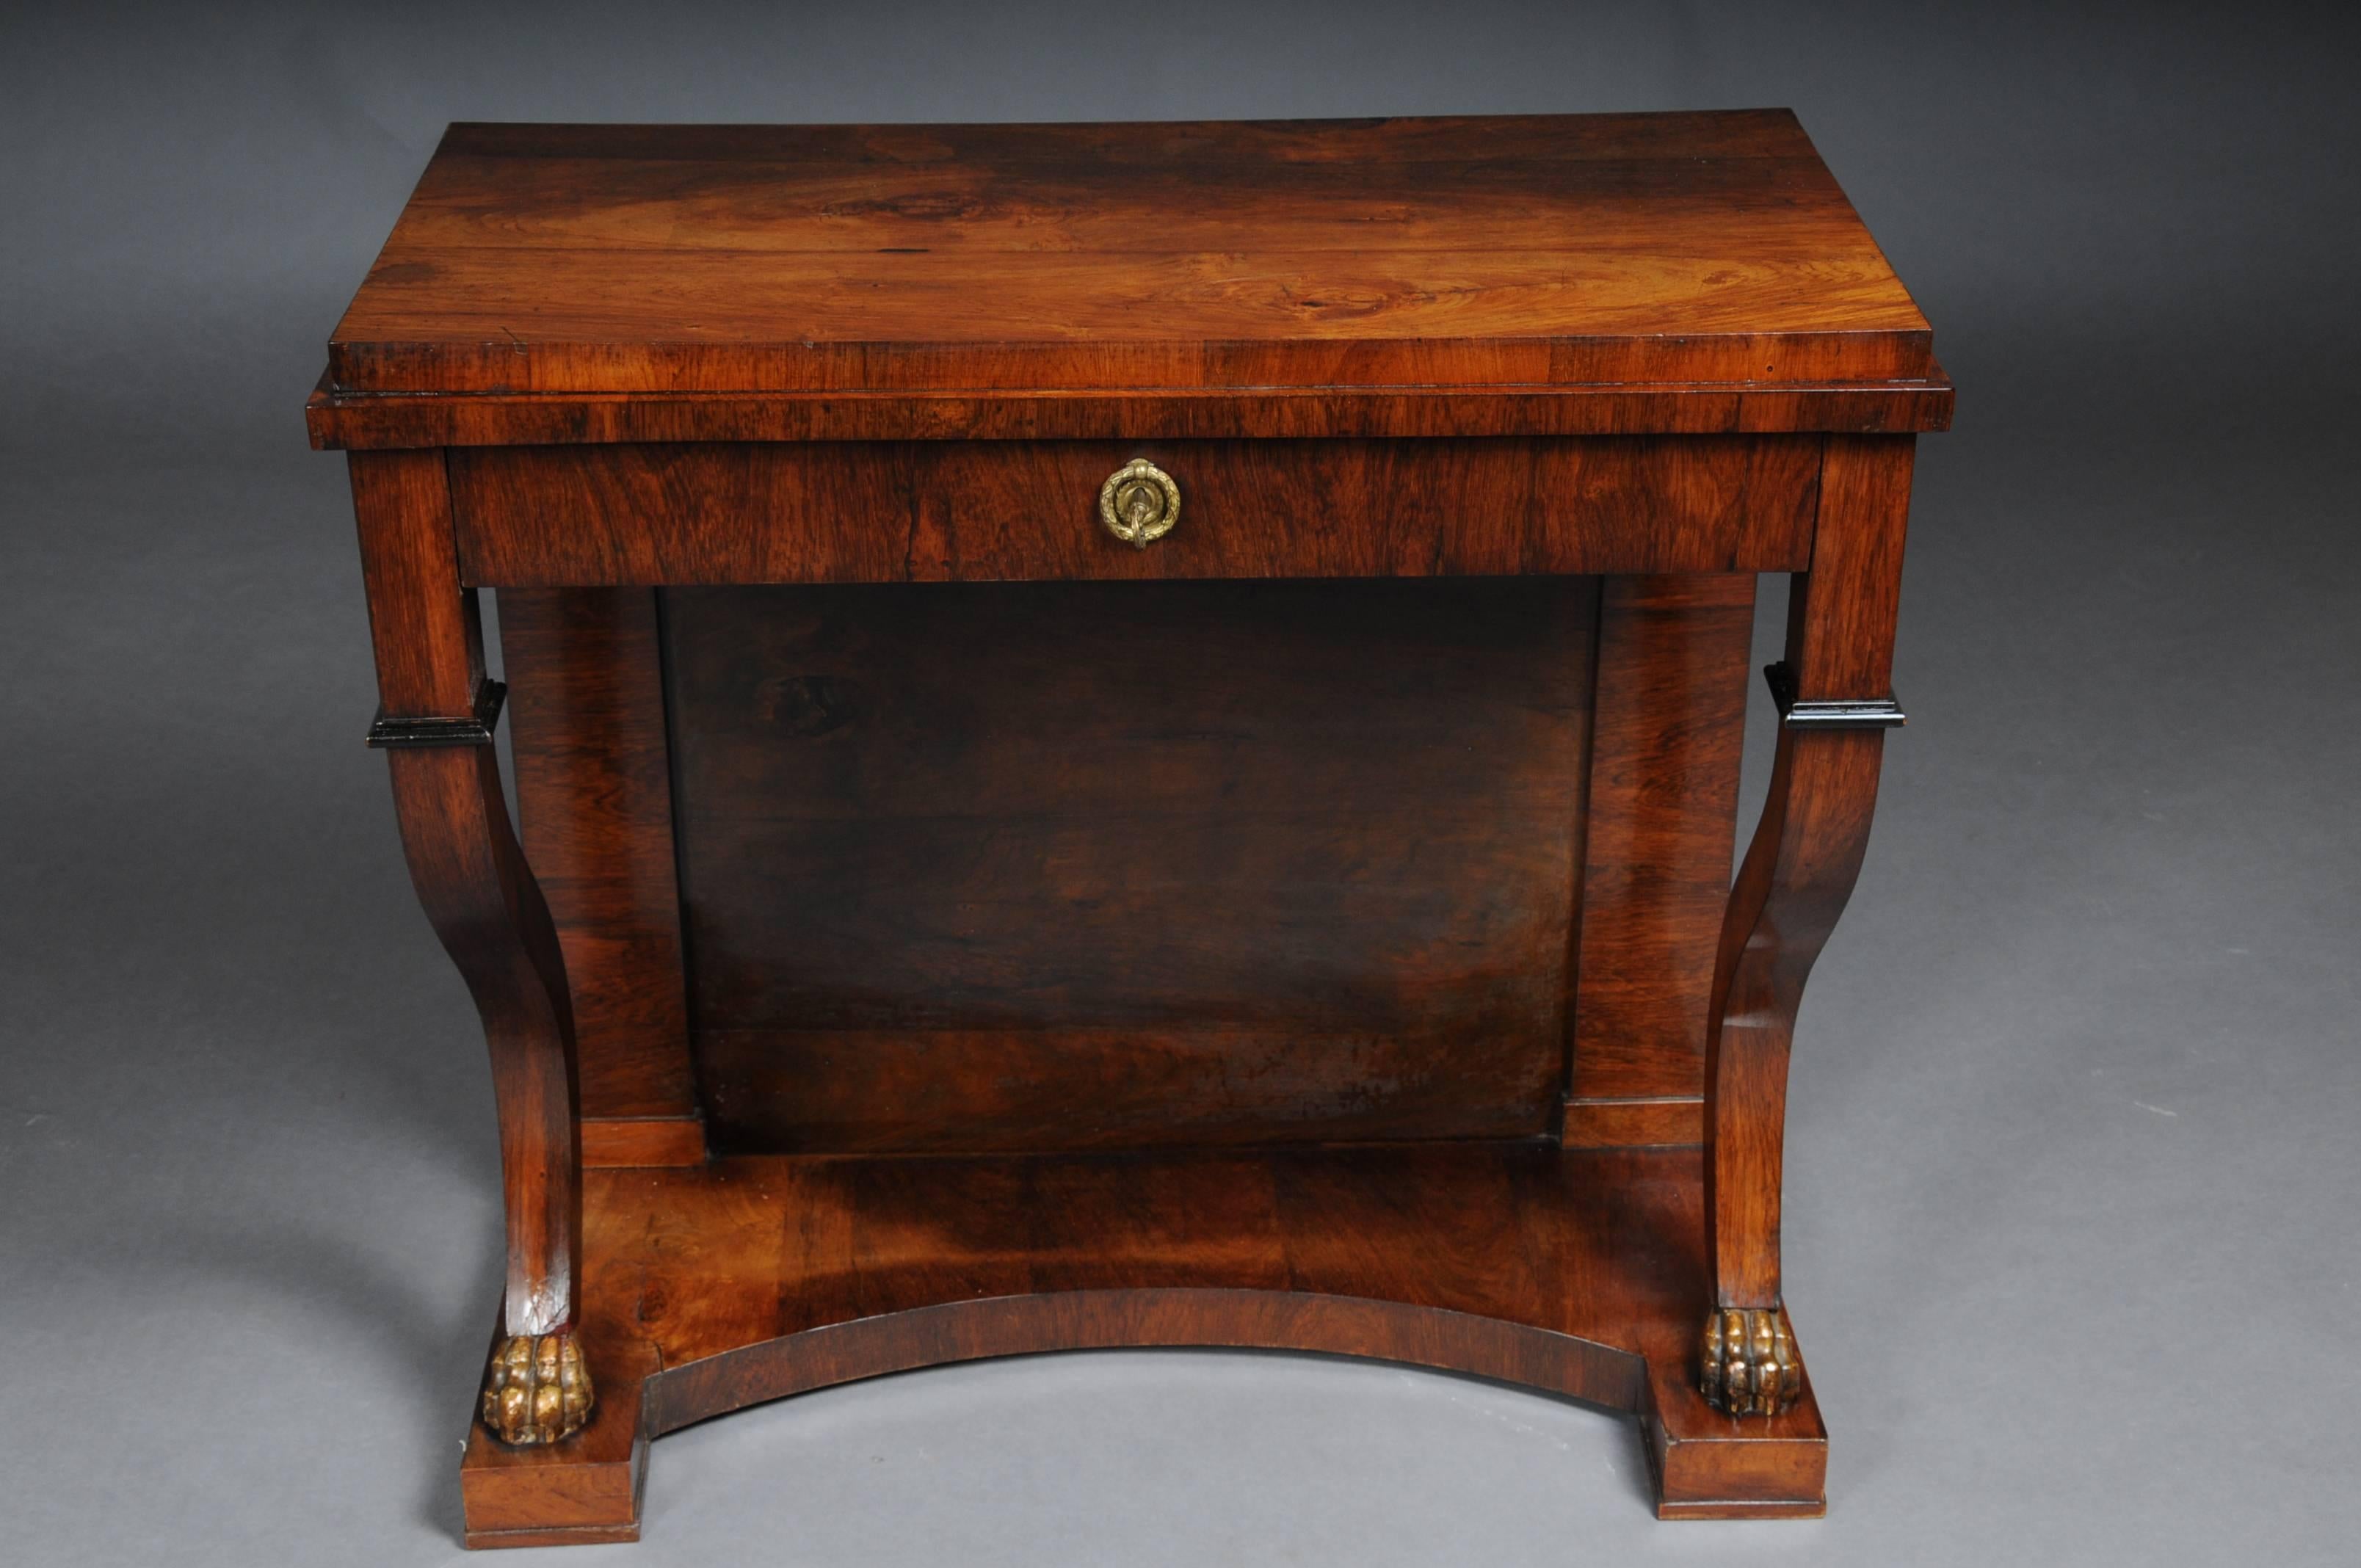 Solid wood with veneer, partly gilded. Rectangular cover plate with an inconspicuous frame and S-shaped curly supports on carved claws, which are held in gold. The base is arched. Partially ebonised. Lockable drawer with key.

(E-22).